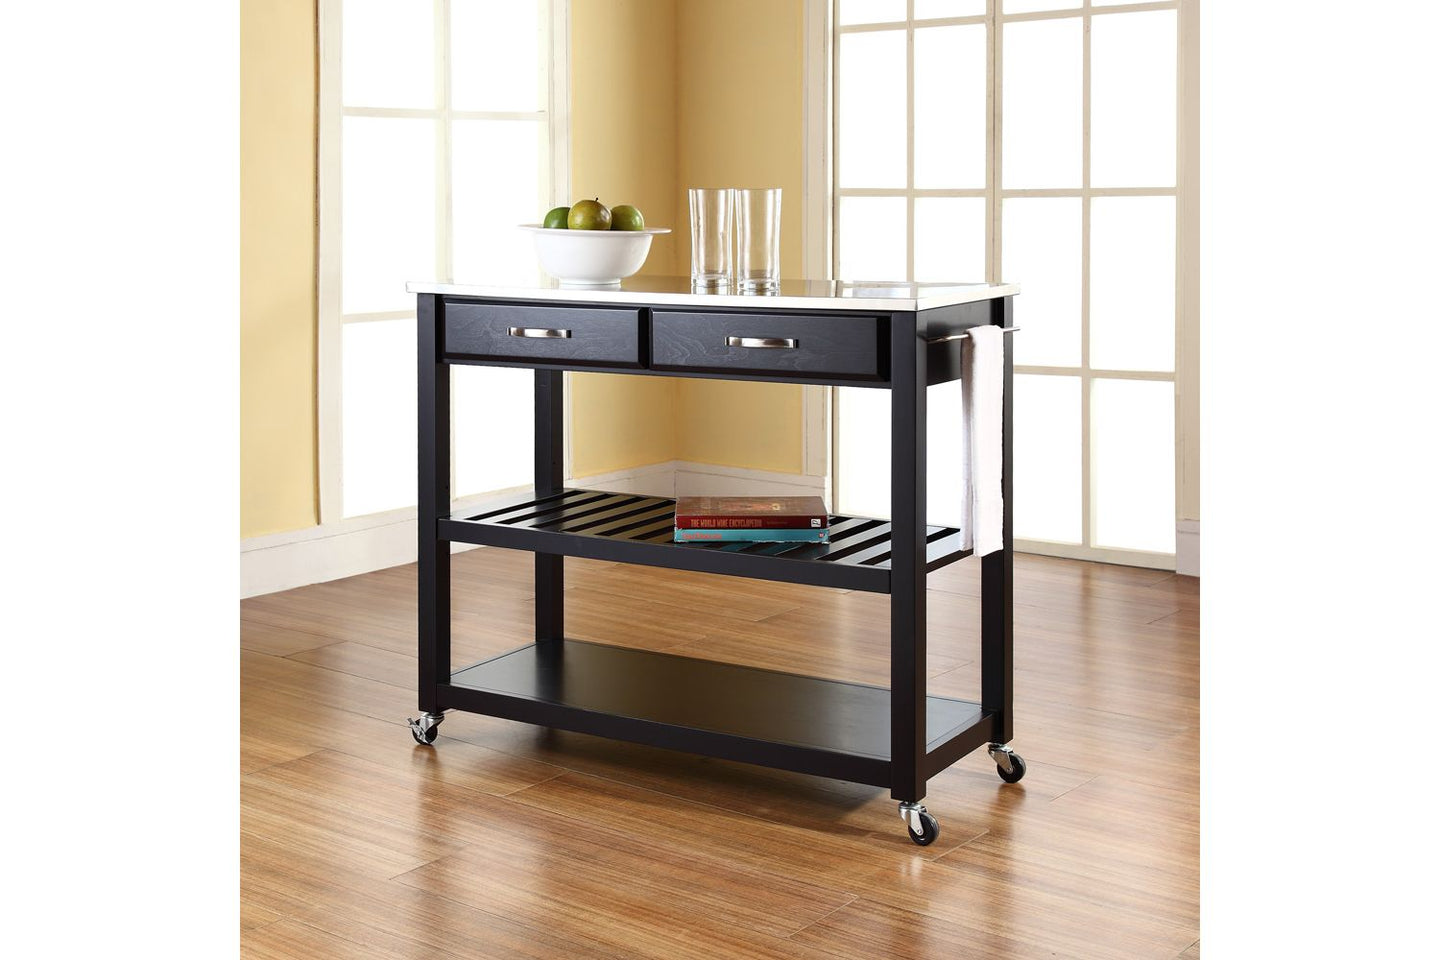 Stainless Steel Top Kitchen Cart/Island in Black #9925